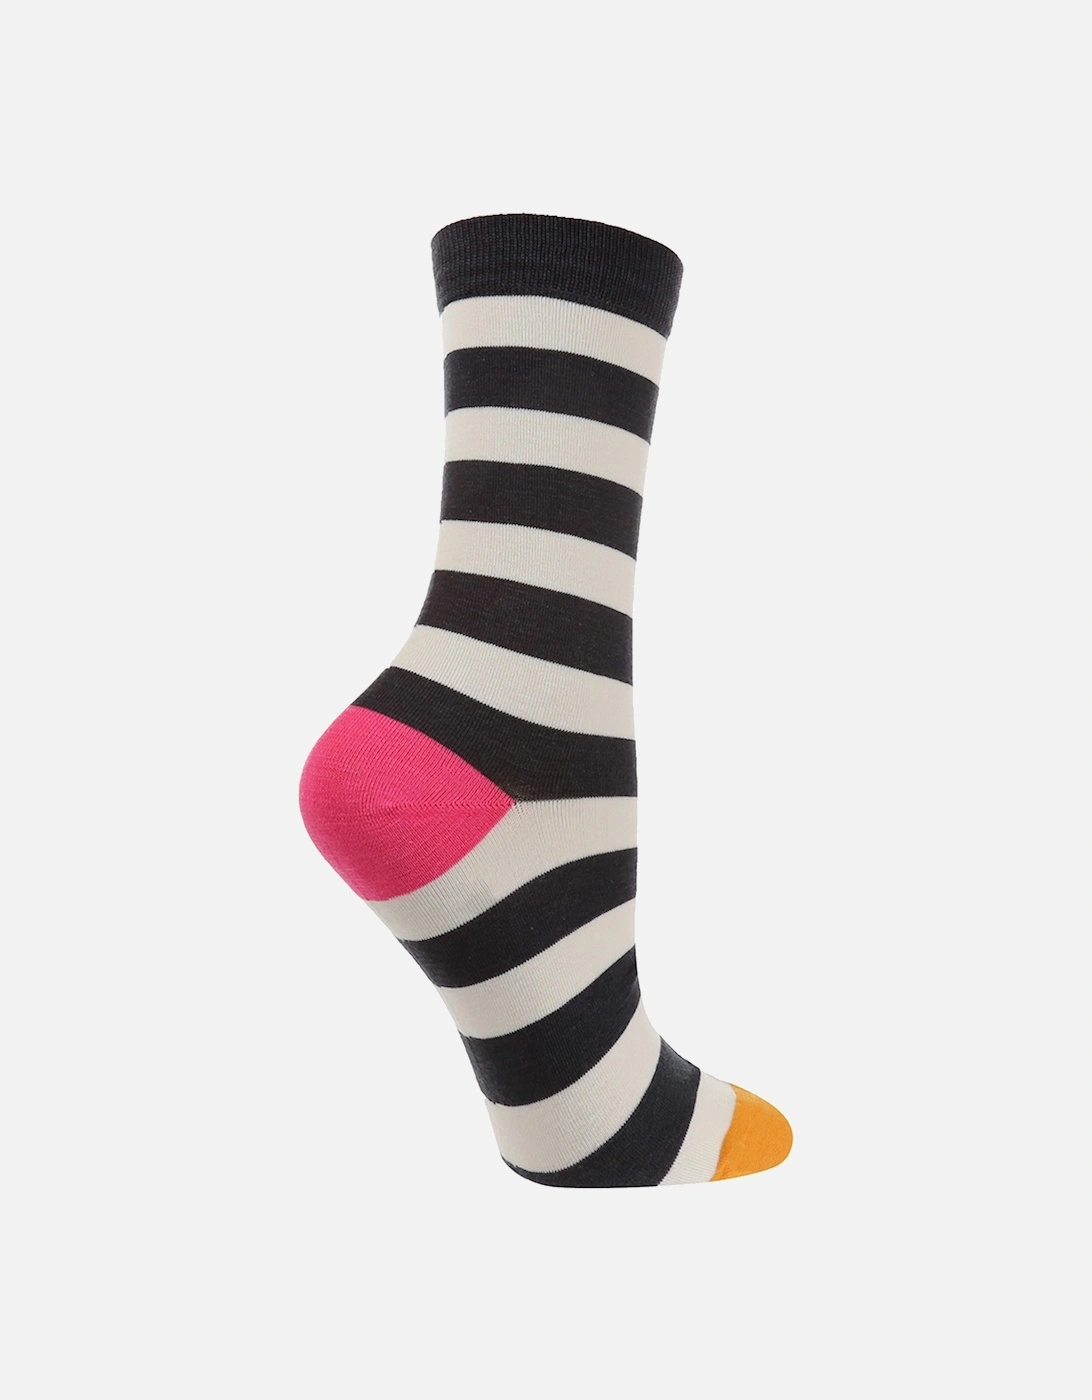 1 PAIR HIGH-END SOCK WITH CHARCOAL AND CREAM STRIPES, 2 of 1